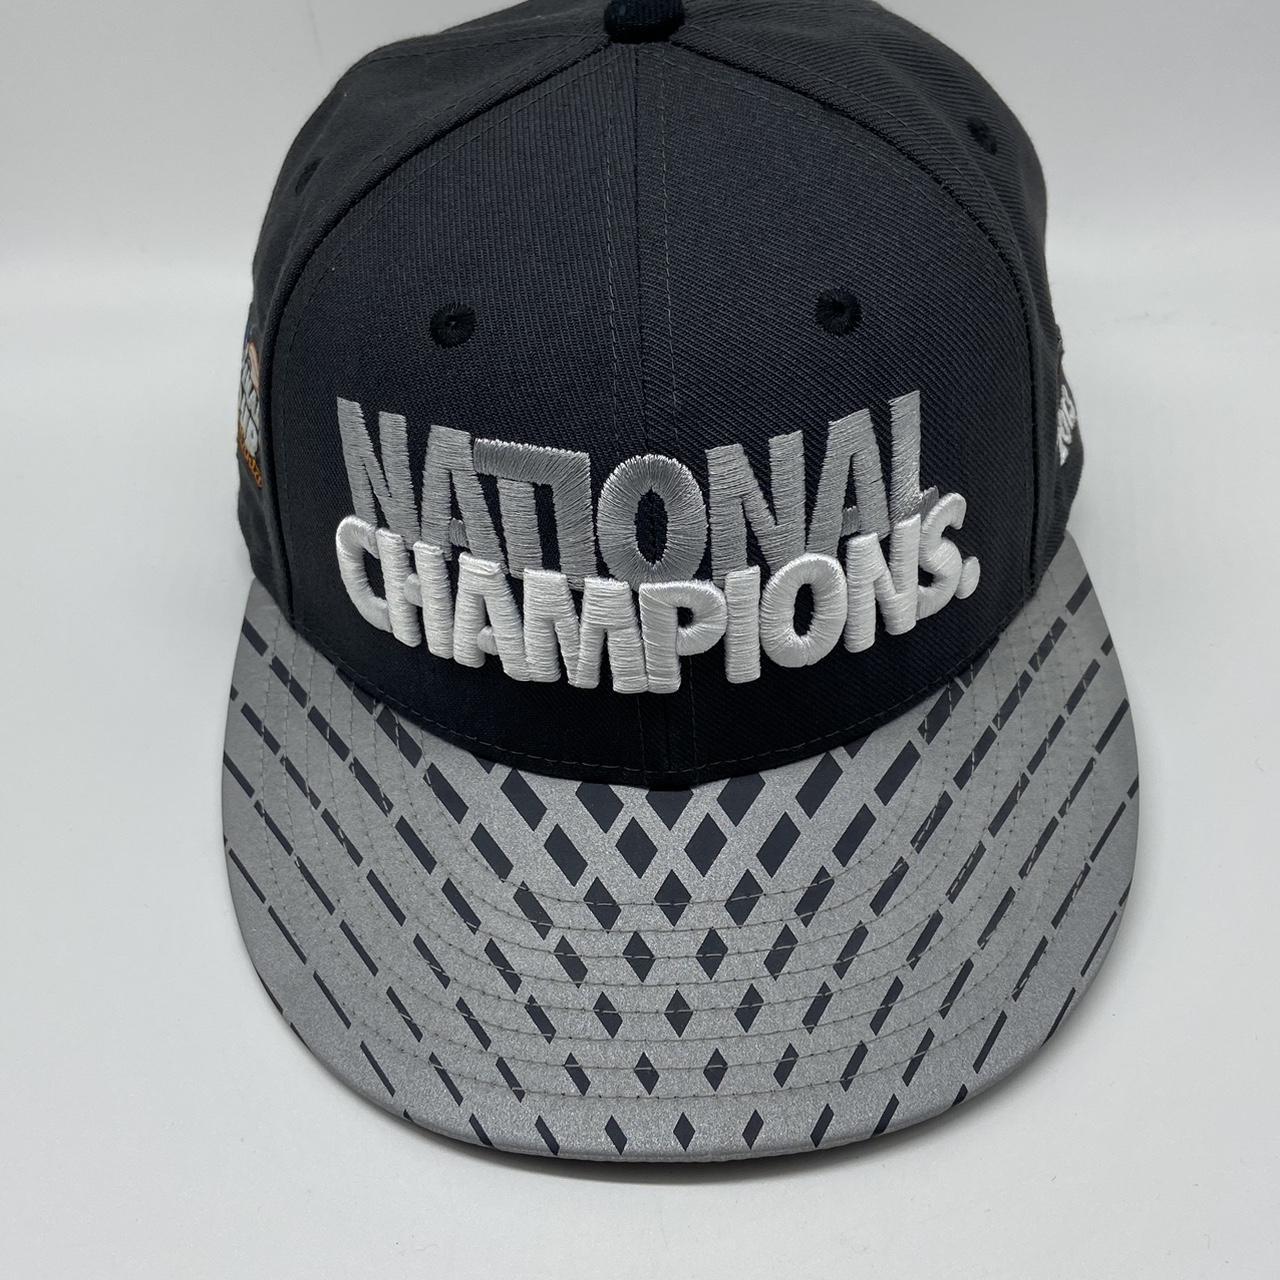 Louisville Cardinals Hat National Champions Nike